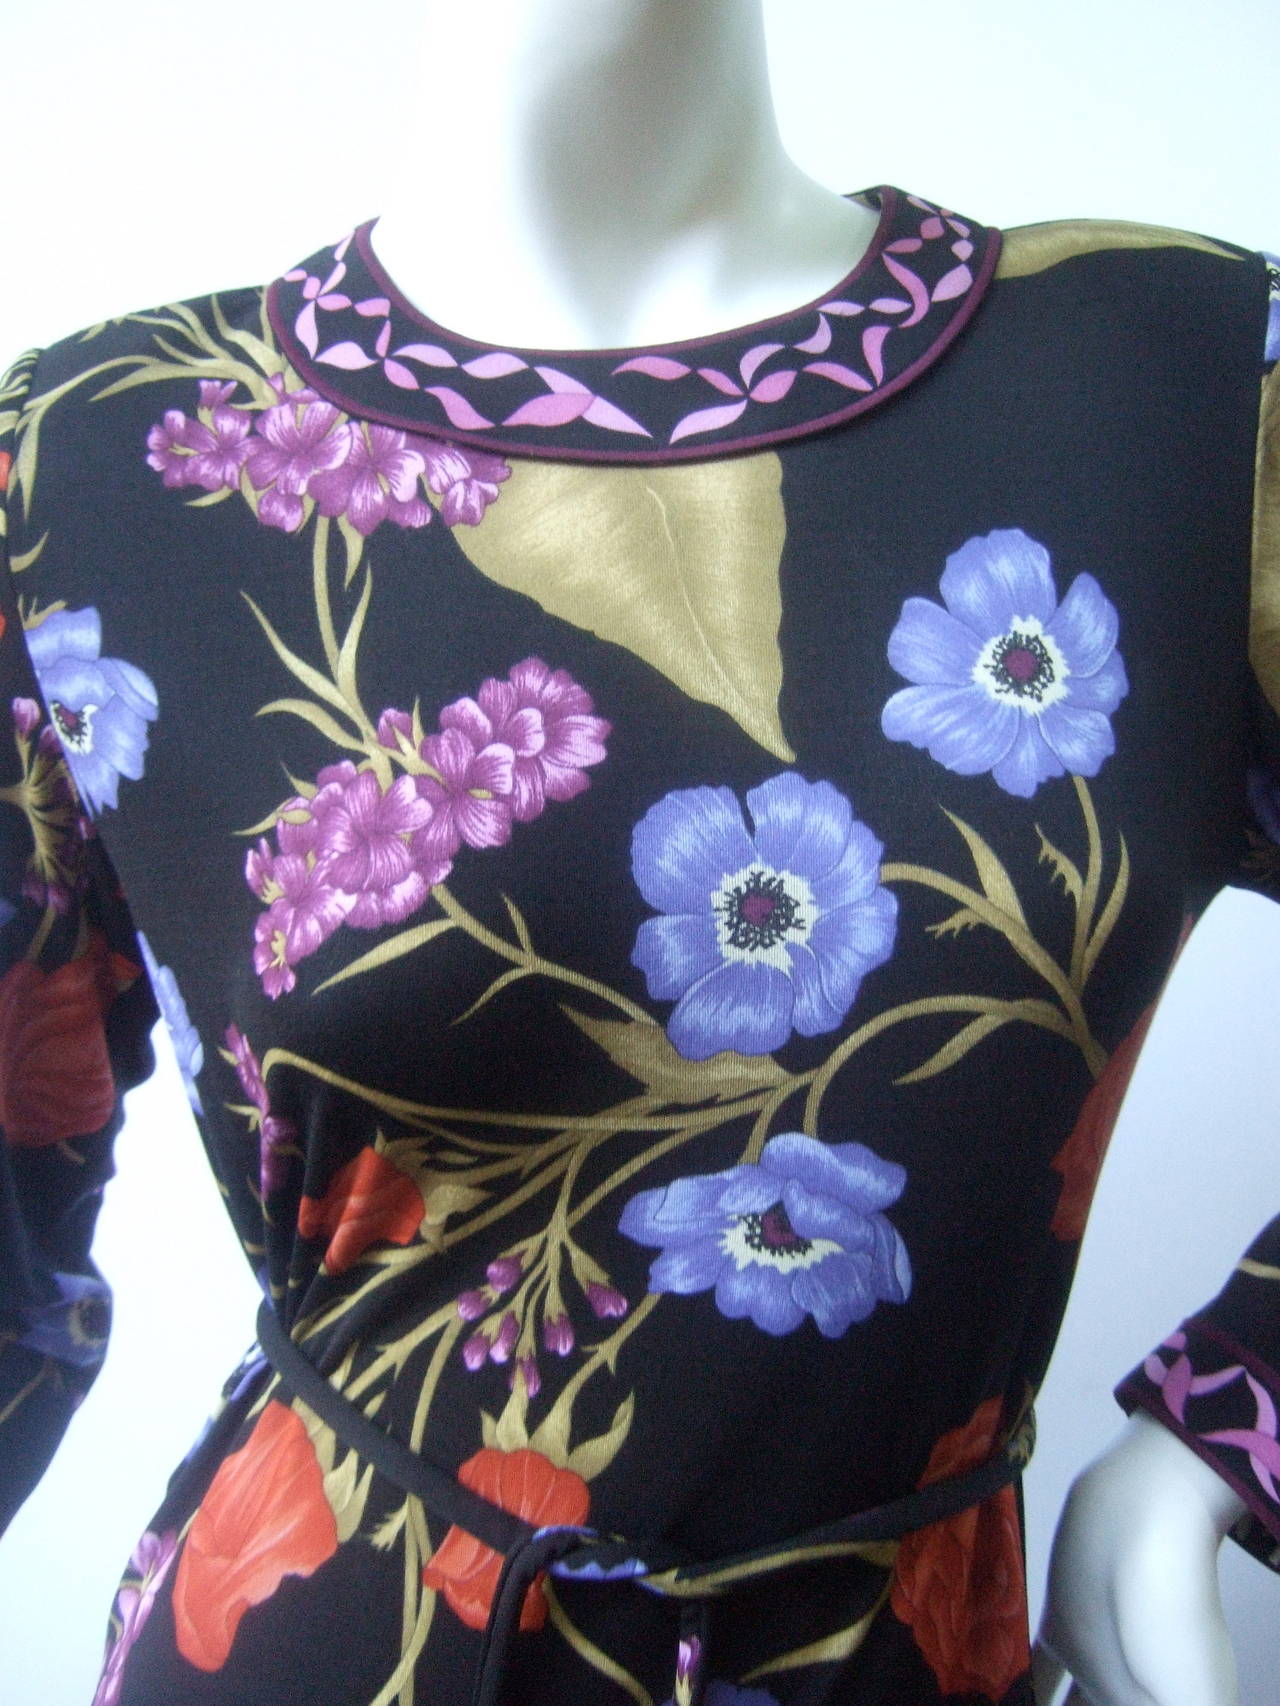 Averardo Bessi Silk jersey floral print dress for Saks Fifth Avenue US Size 4
The vibrant print jersey dress is illuminated with a field of lush flower blooms
The sinuous lavender, violet & burnt orange flowers burst against the black silk